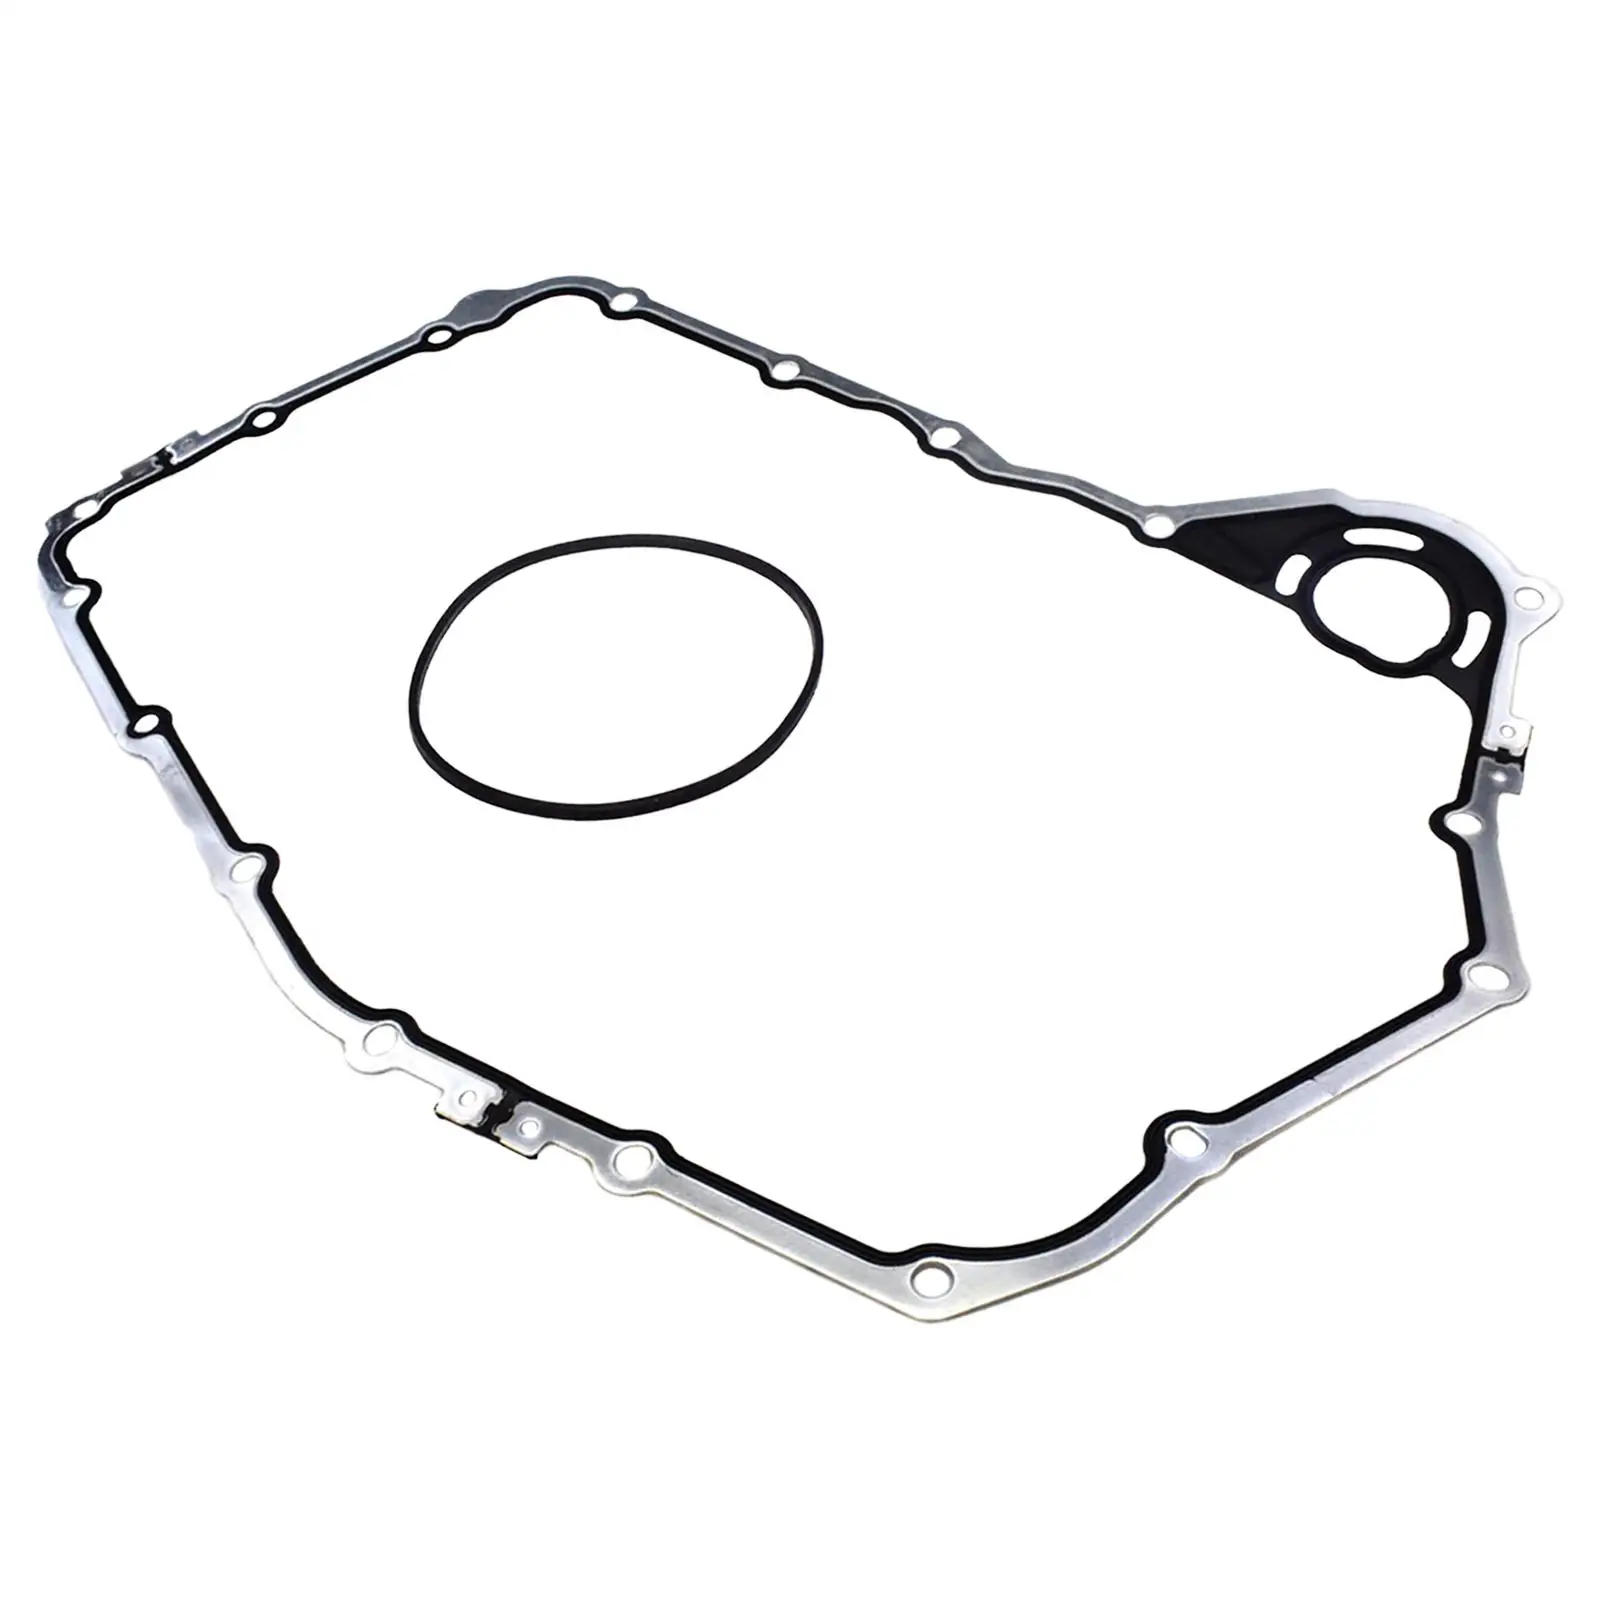 4T65E Automatic Transmission Case Gasket Side , 24206959 Car Accessory, Rubber